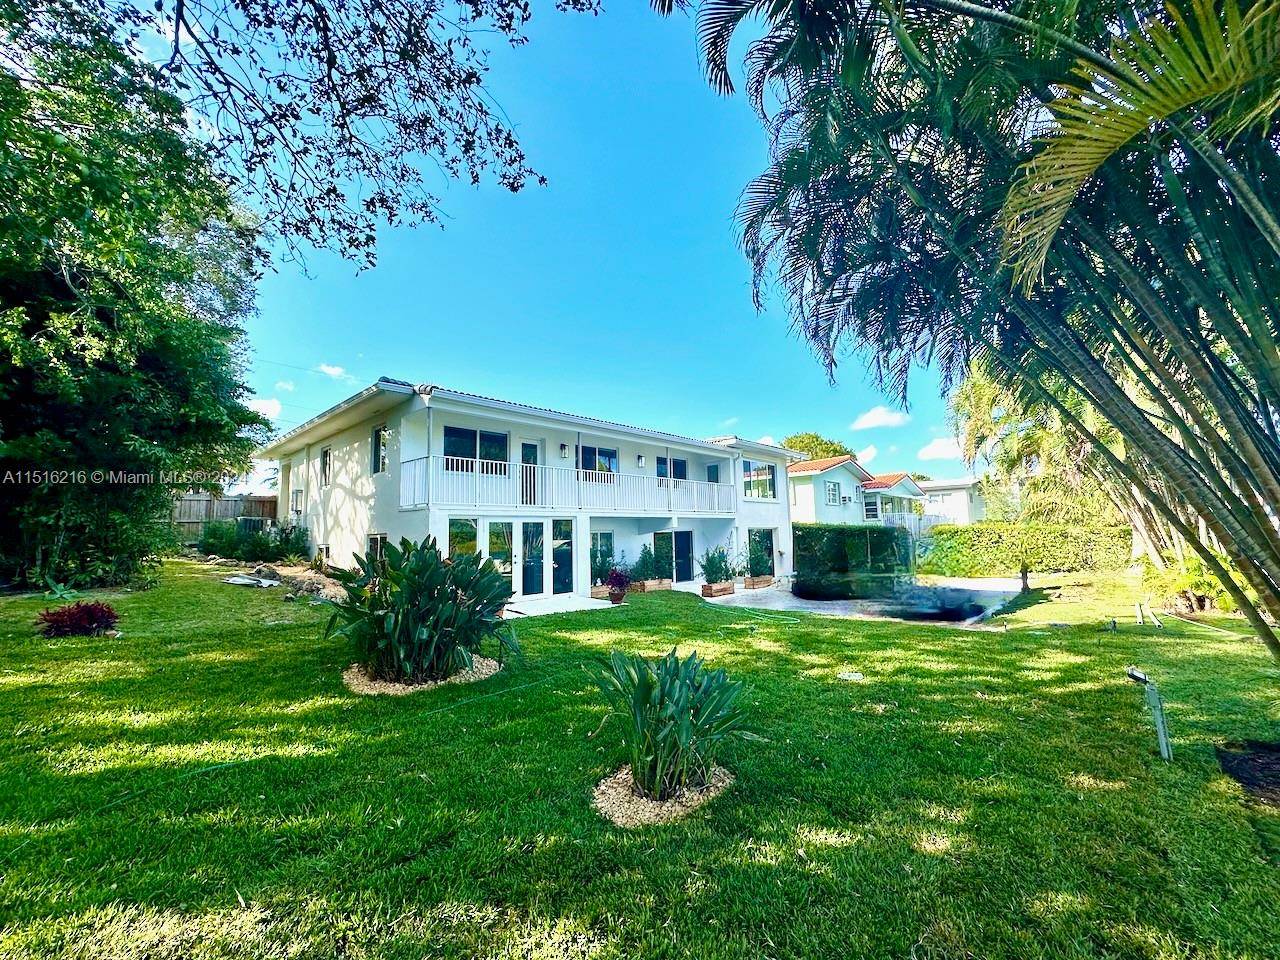 Miami Shores lake WATERFRONT 4 bed 2 1 2 baths lake house with 3 bedroom 2 bath on 2nd floor and large 1 bed 1 bath the first floor that ...